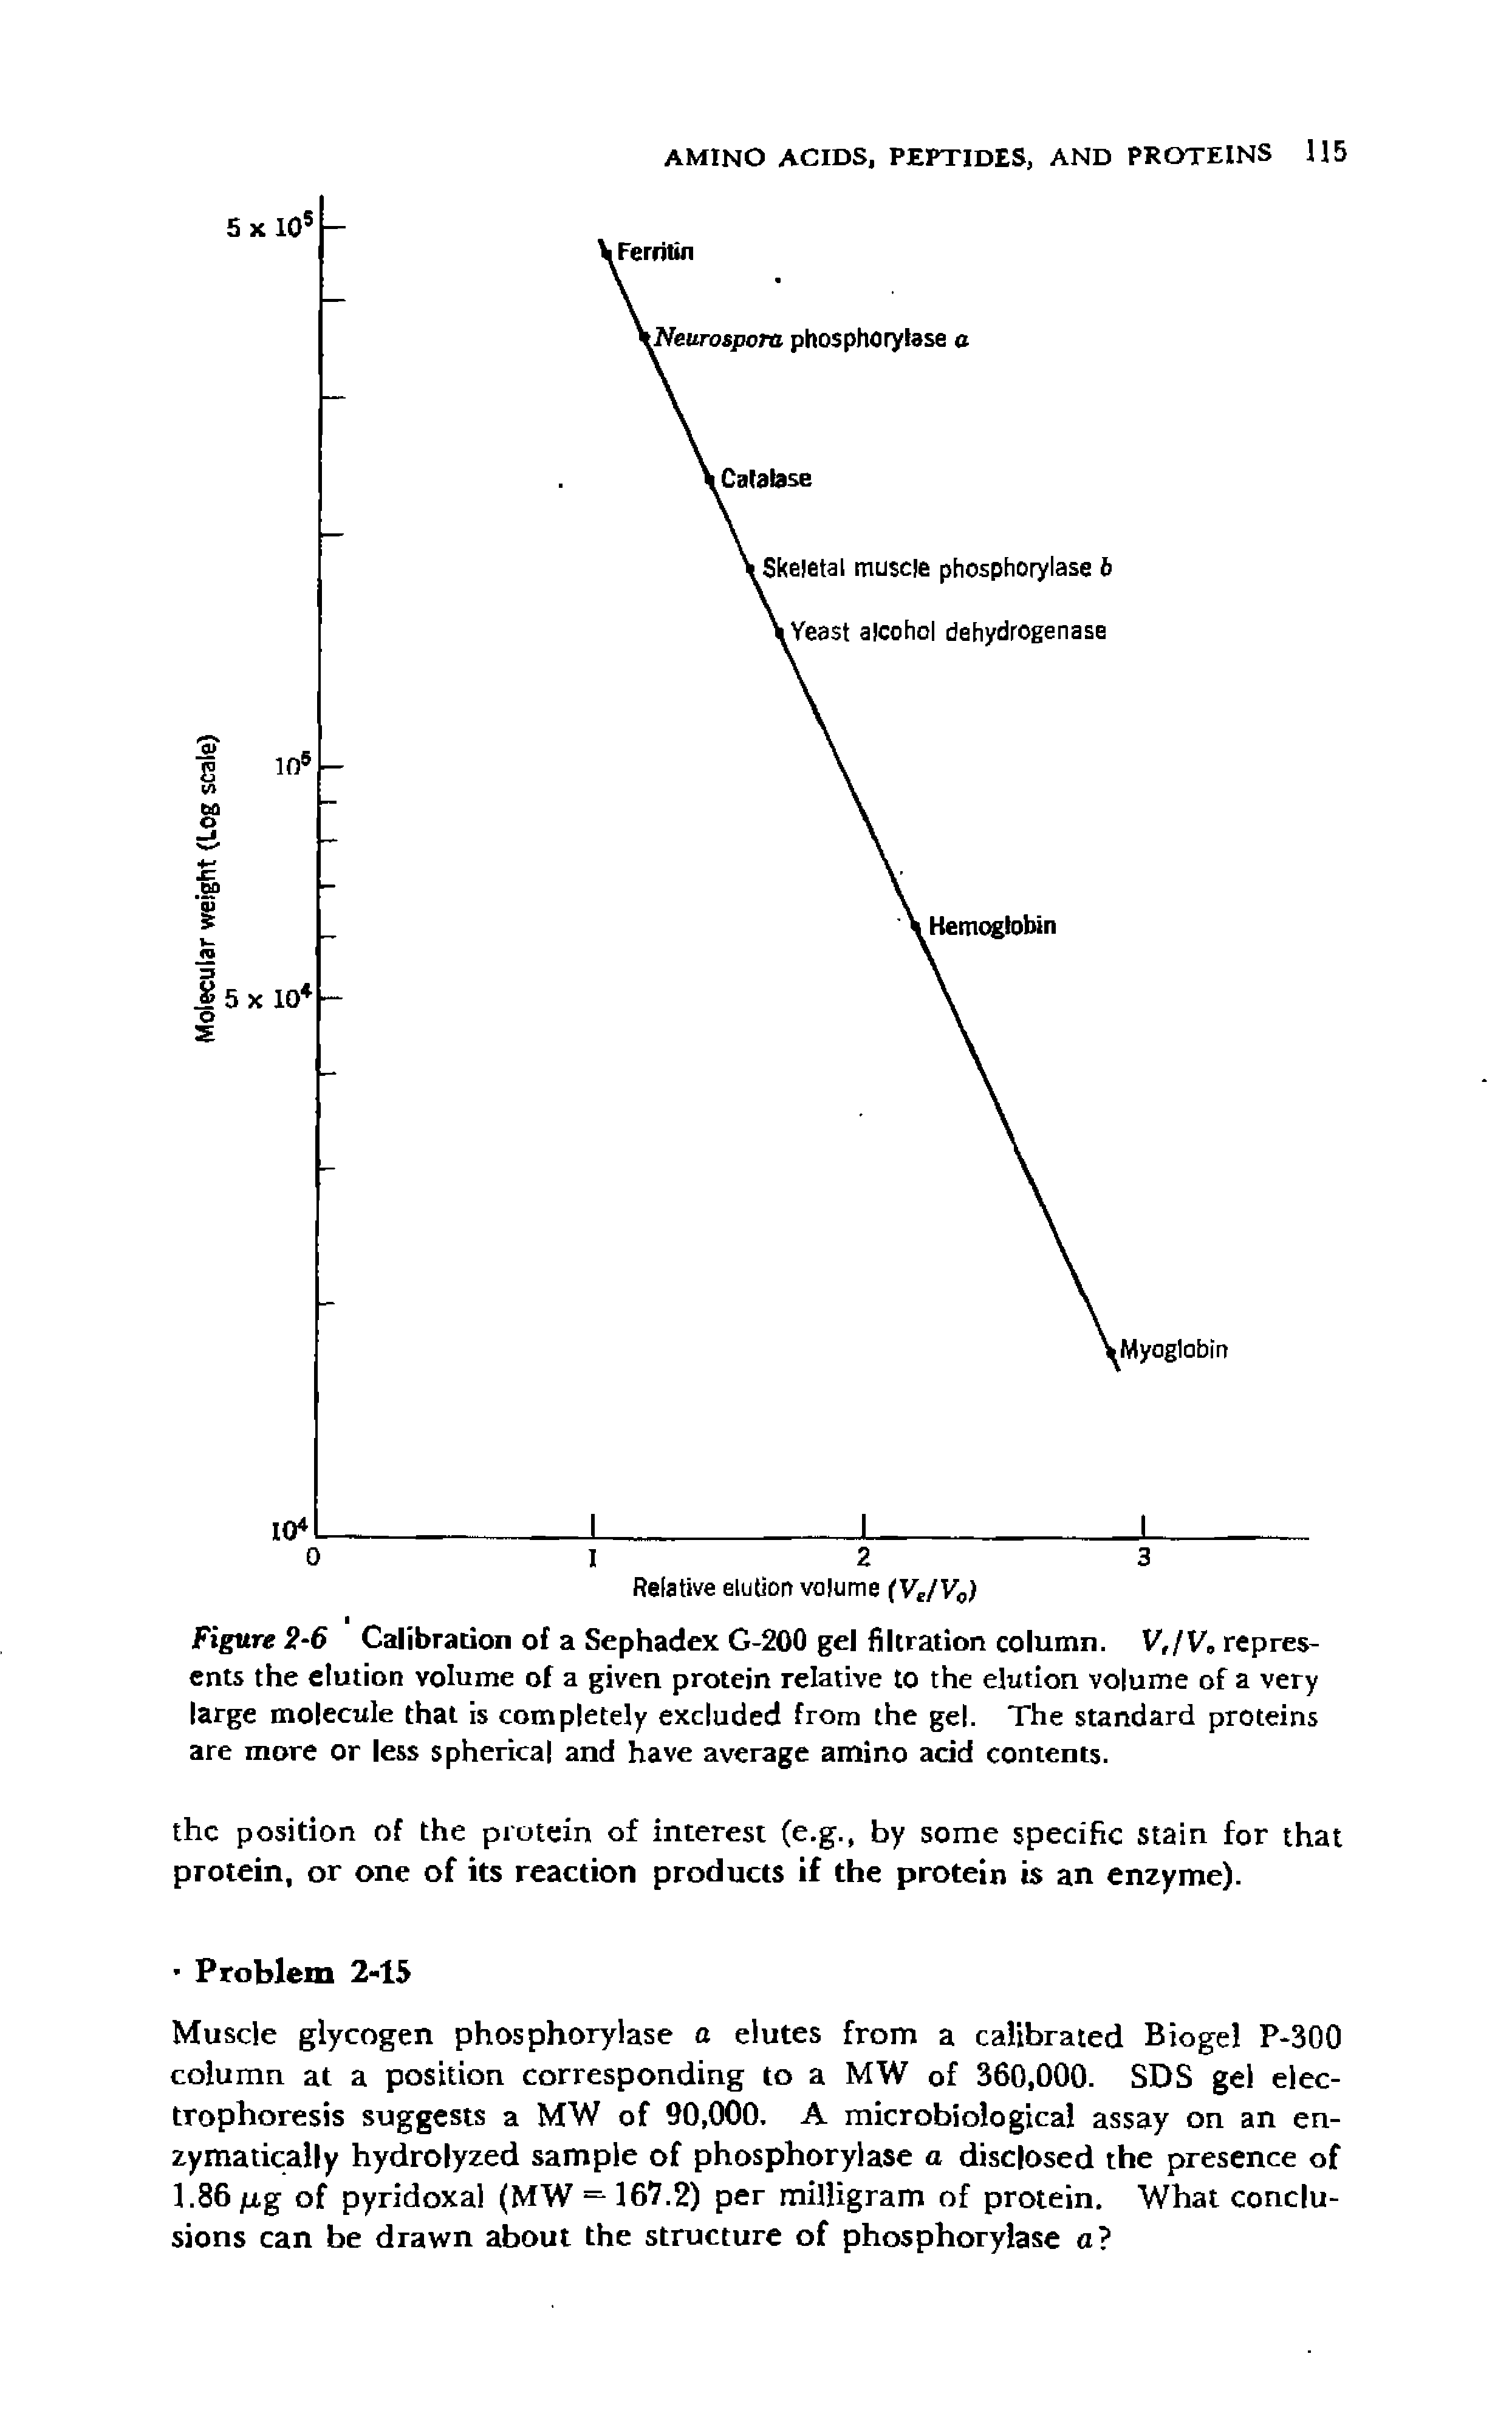 Figure 2-6 Calibration of a Sephadex G-200 gel filtration column. V,/V, represents the elution volume of a given protein relative to the elution volume of a very large molecule that is completely excluded from the gel. The standard proteins are more or less spherical and have average amino acid contents.